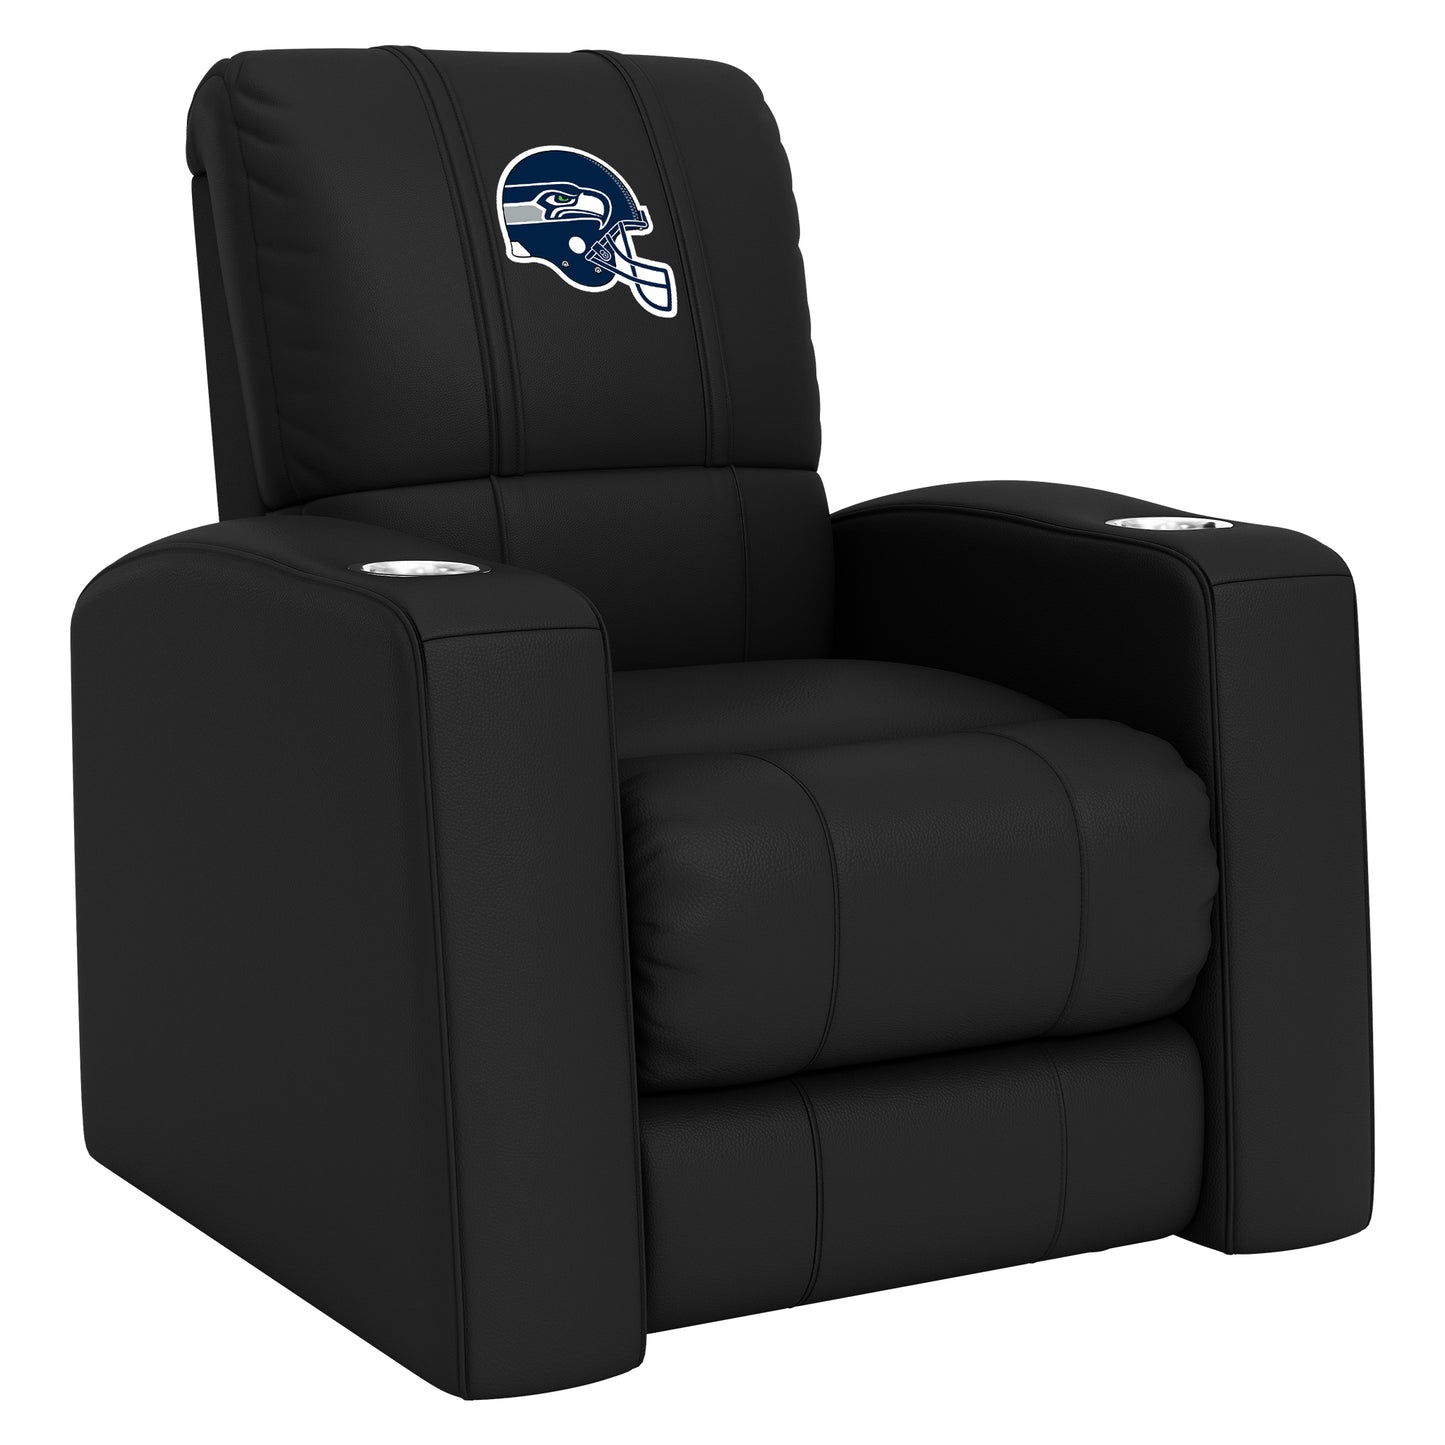 Relax Home Theater Recliner with  Seattle Seahawks Helmet Logo